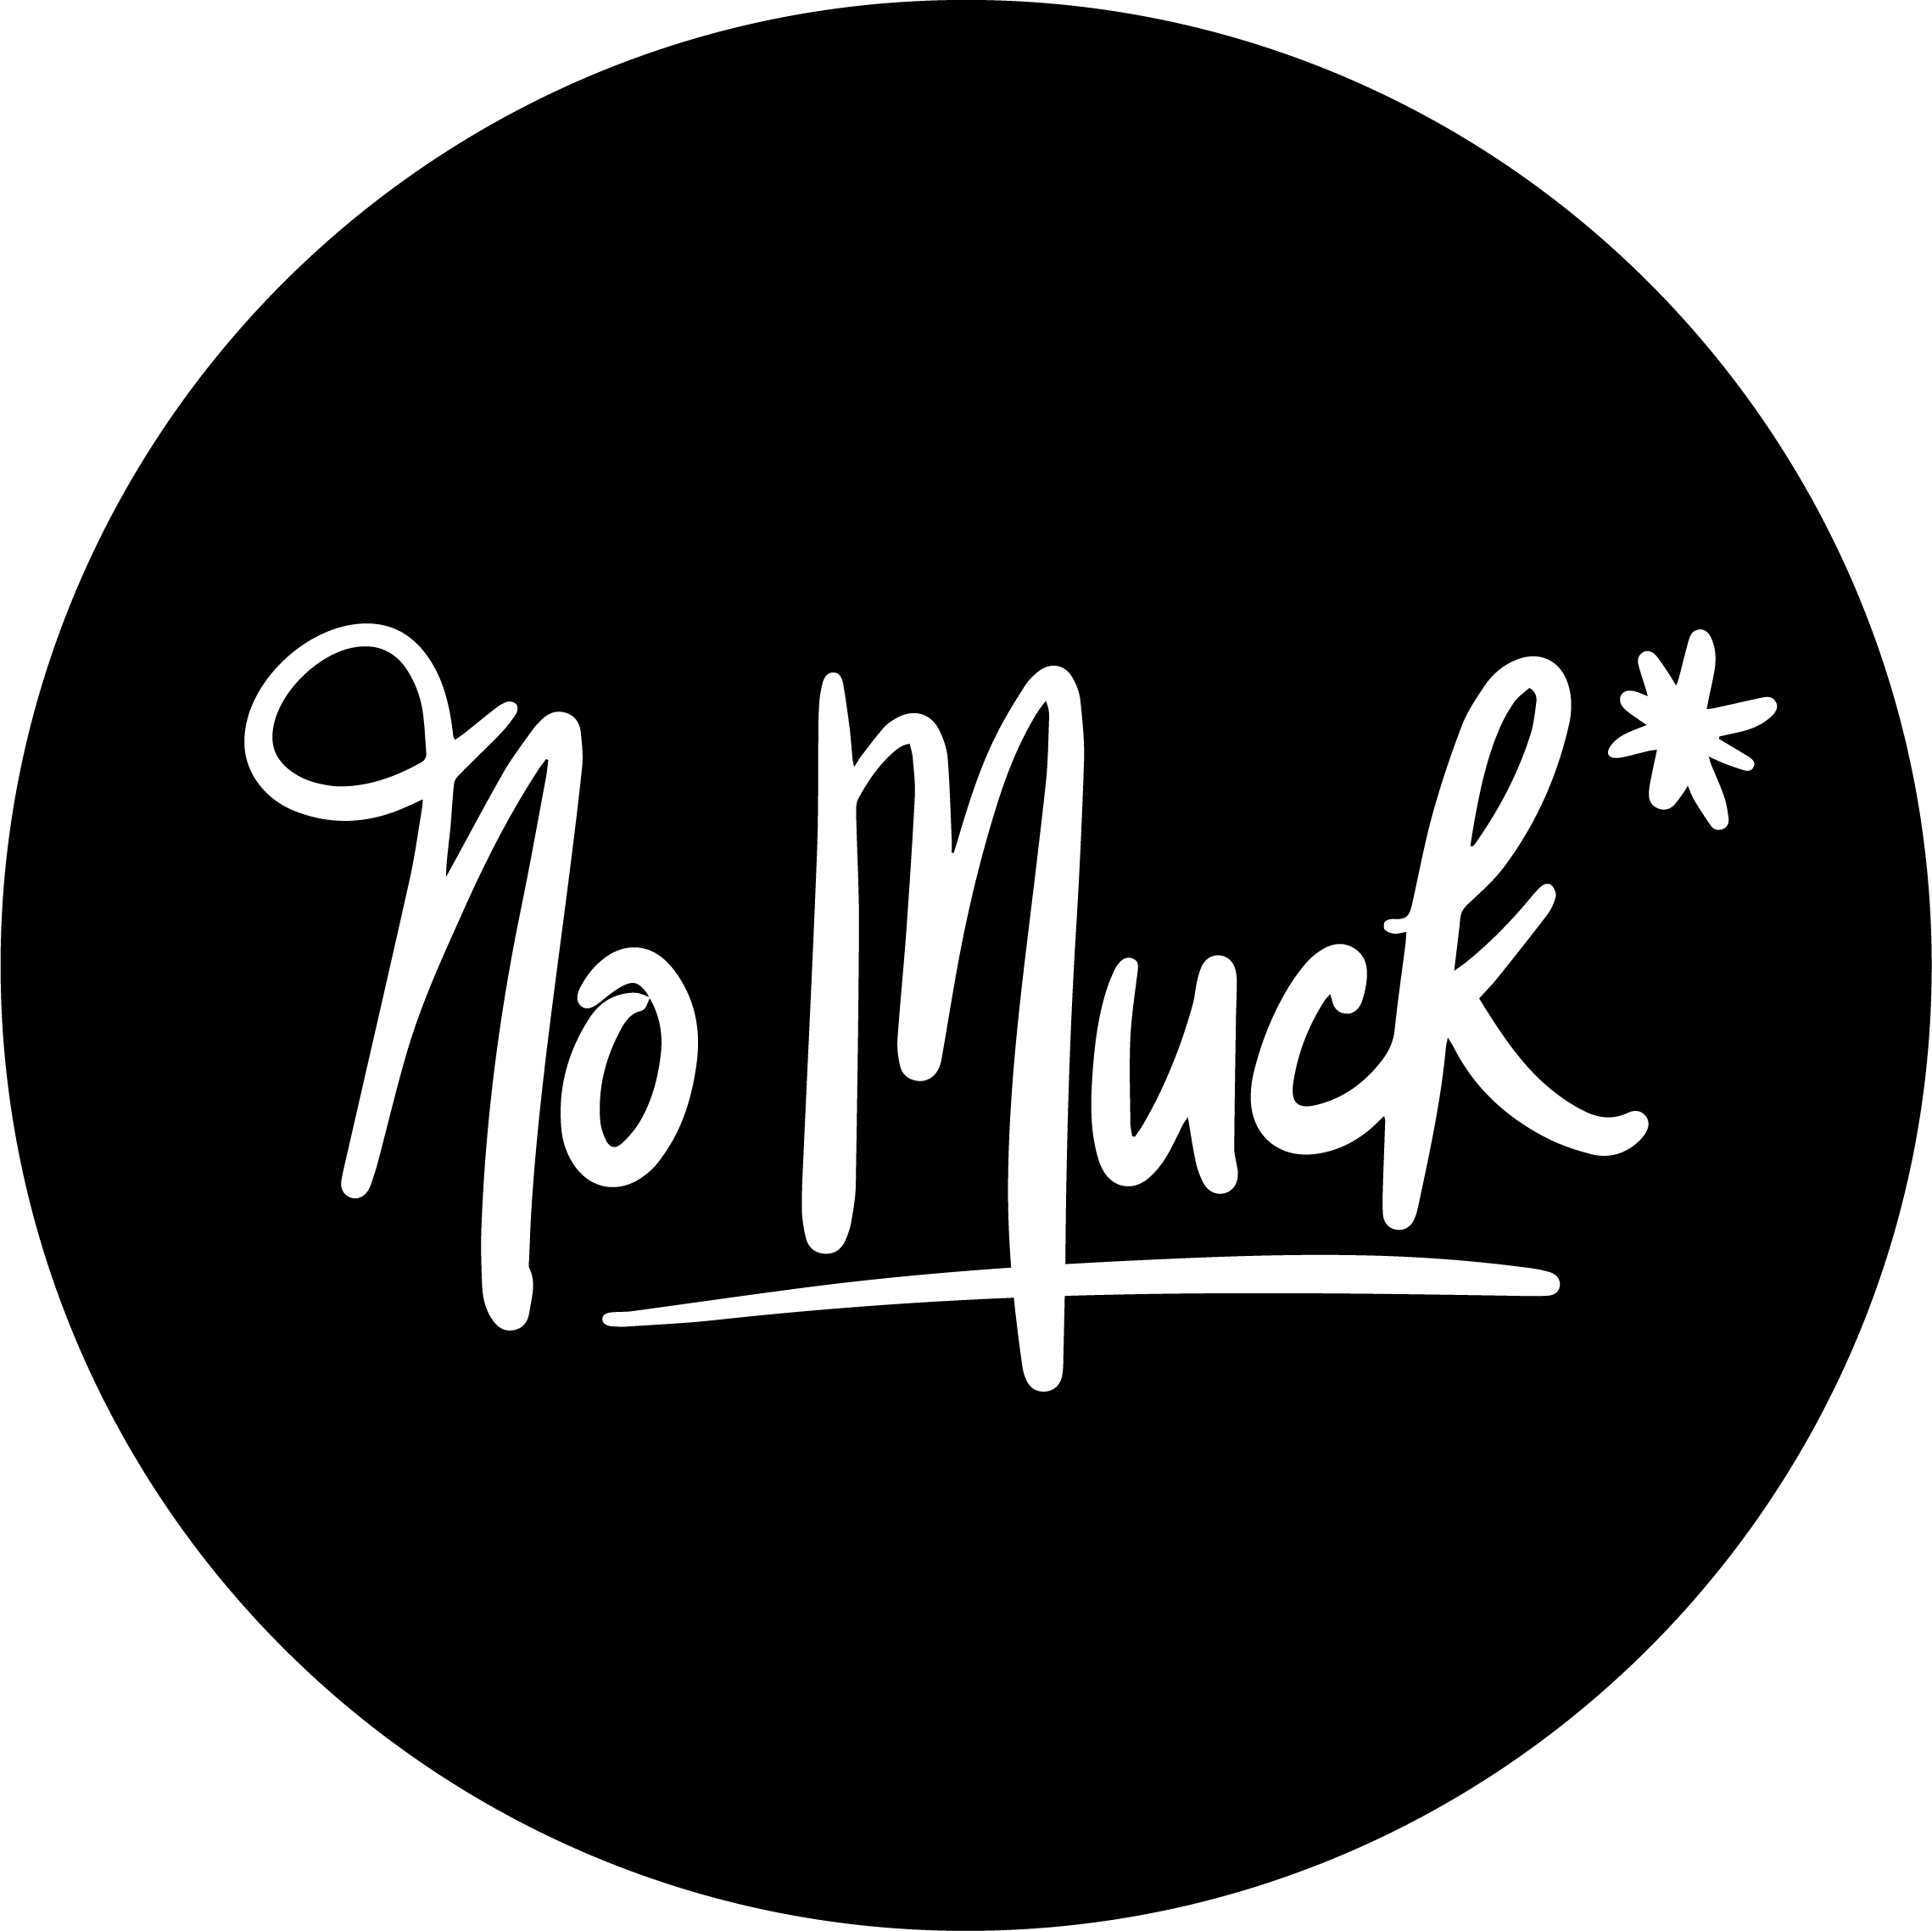 Muck Logo - No Muck* – Yes To Your Best Life!